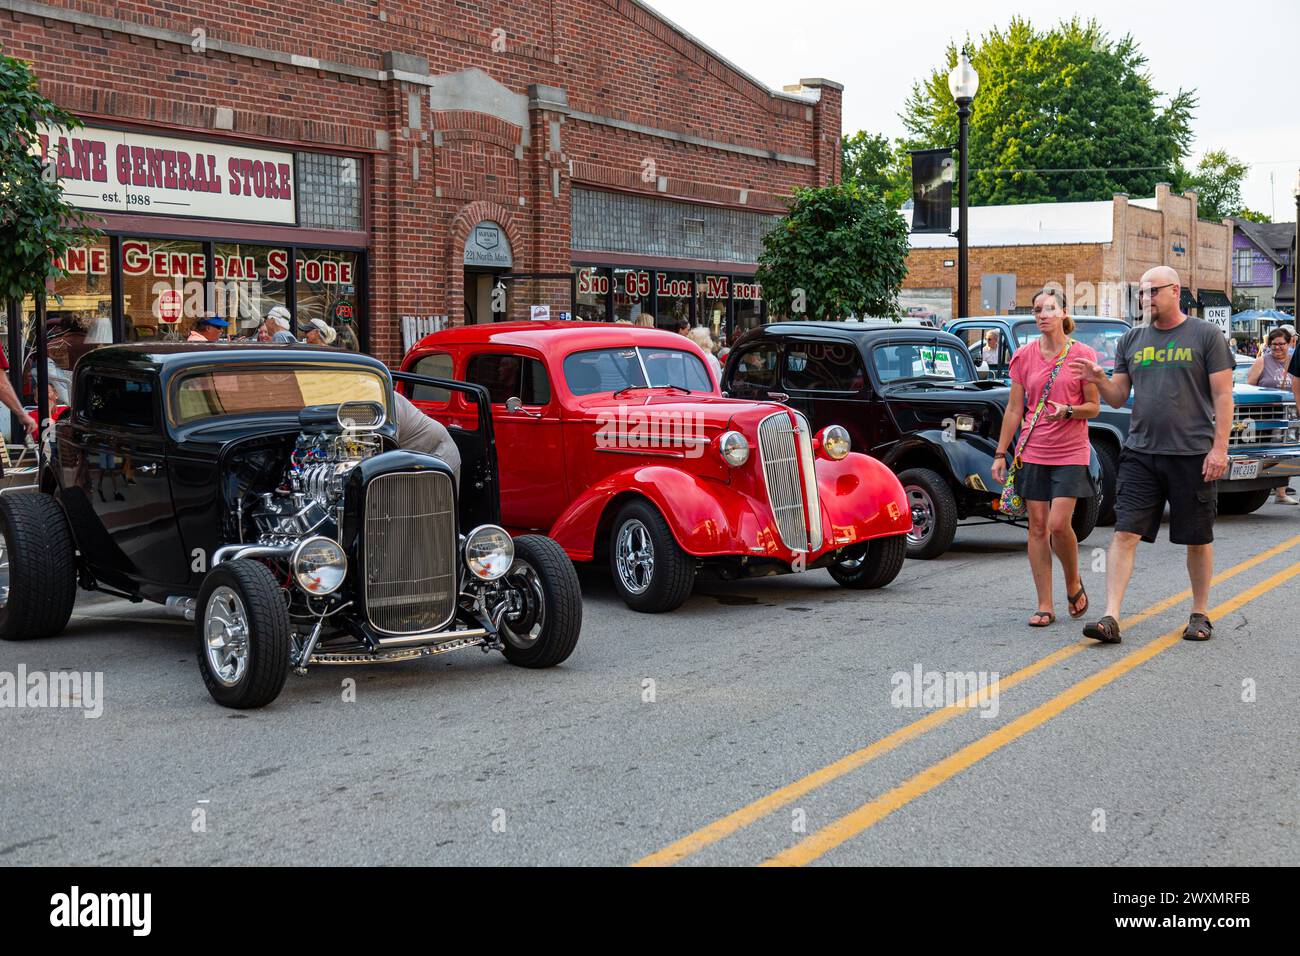 A couple walks past a red 1936 Chevrolet & a black 1932 Ford hotrod on display in front of the Country Lane General Store at a car show in Auburn, Ind. Stock Photo